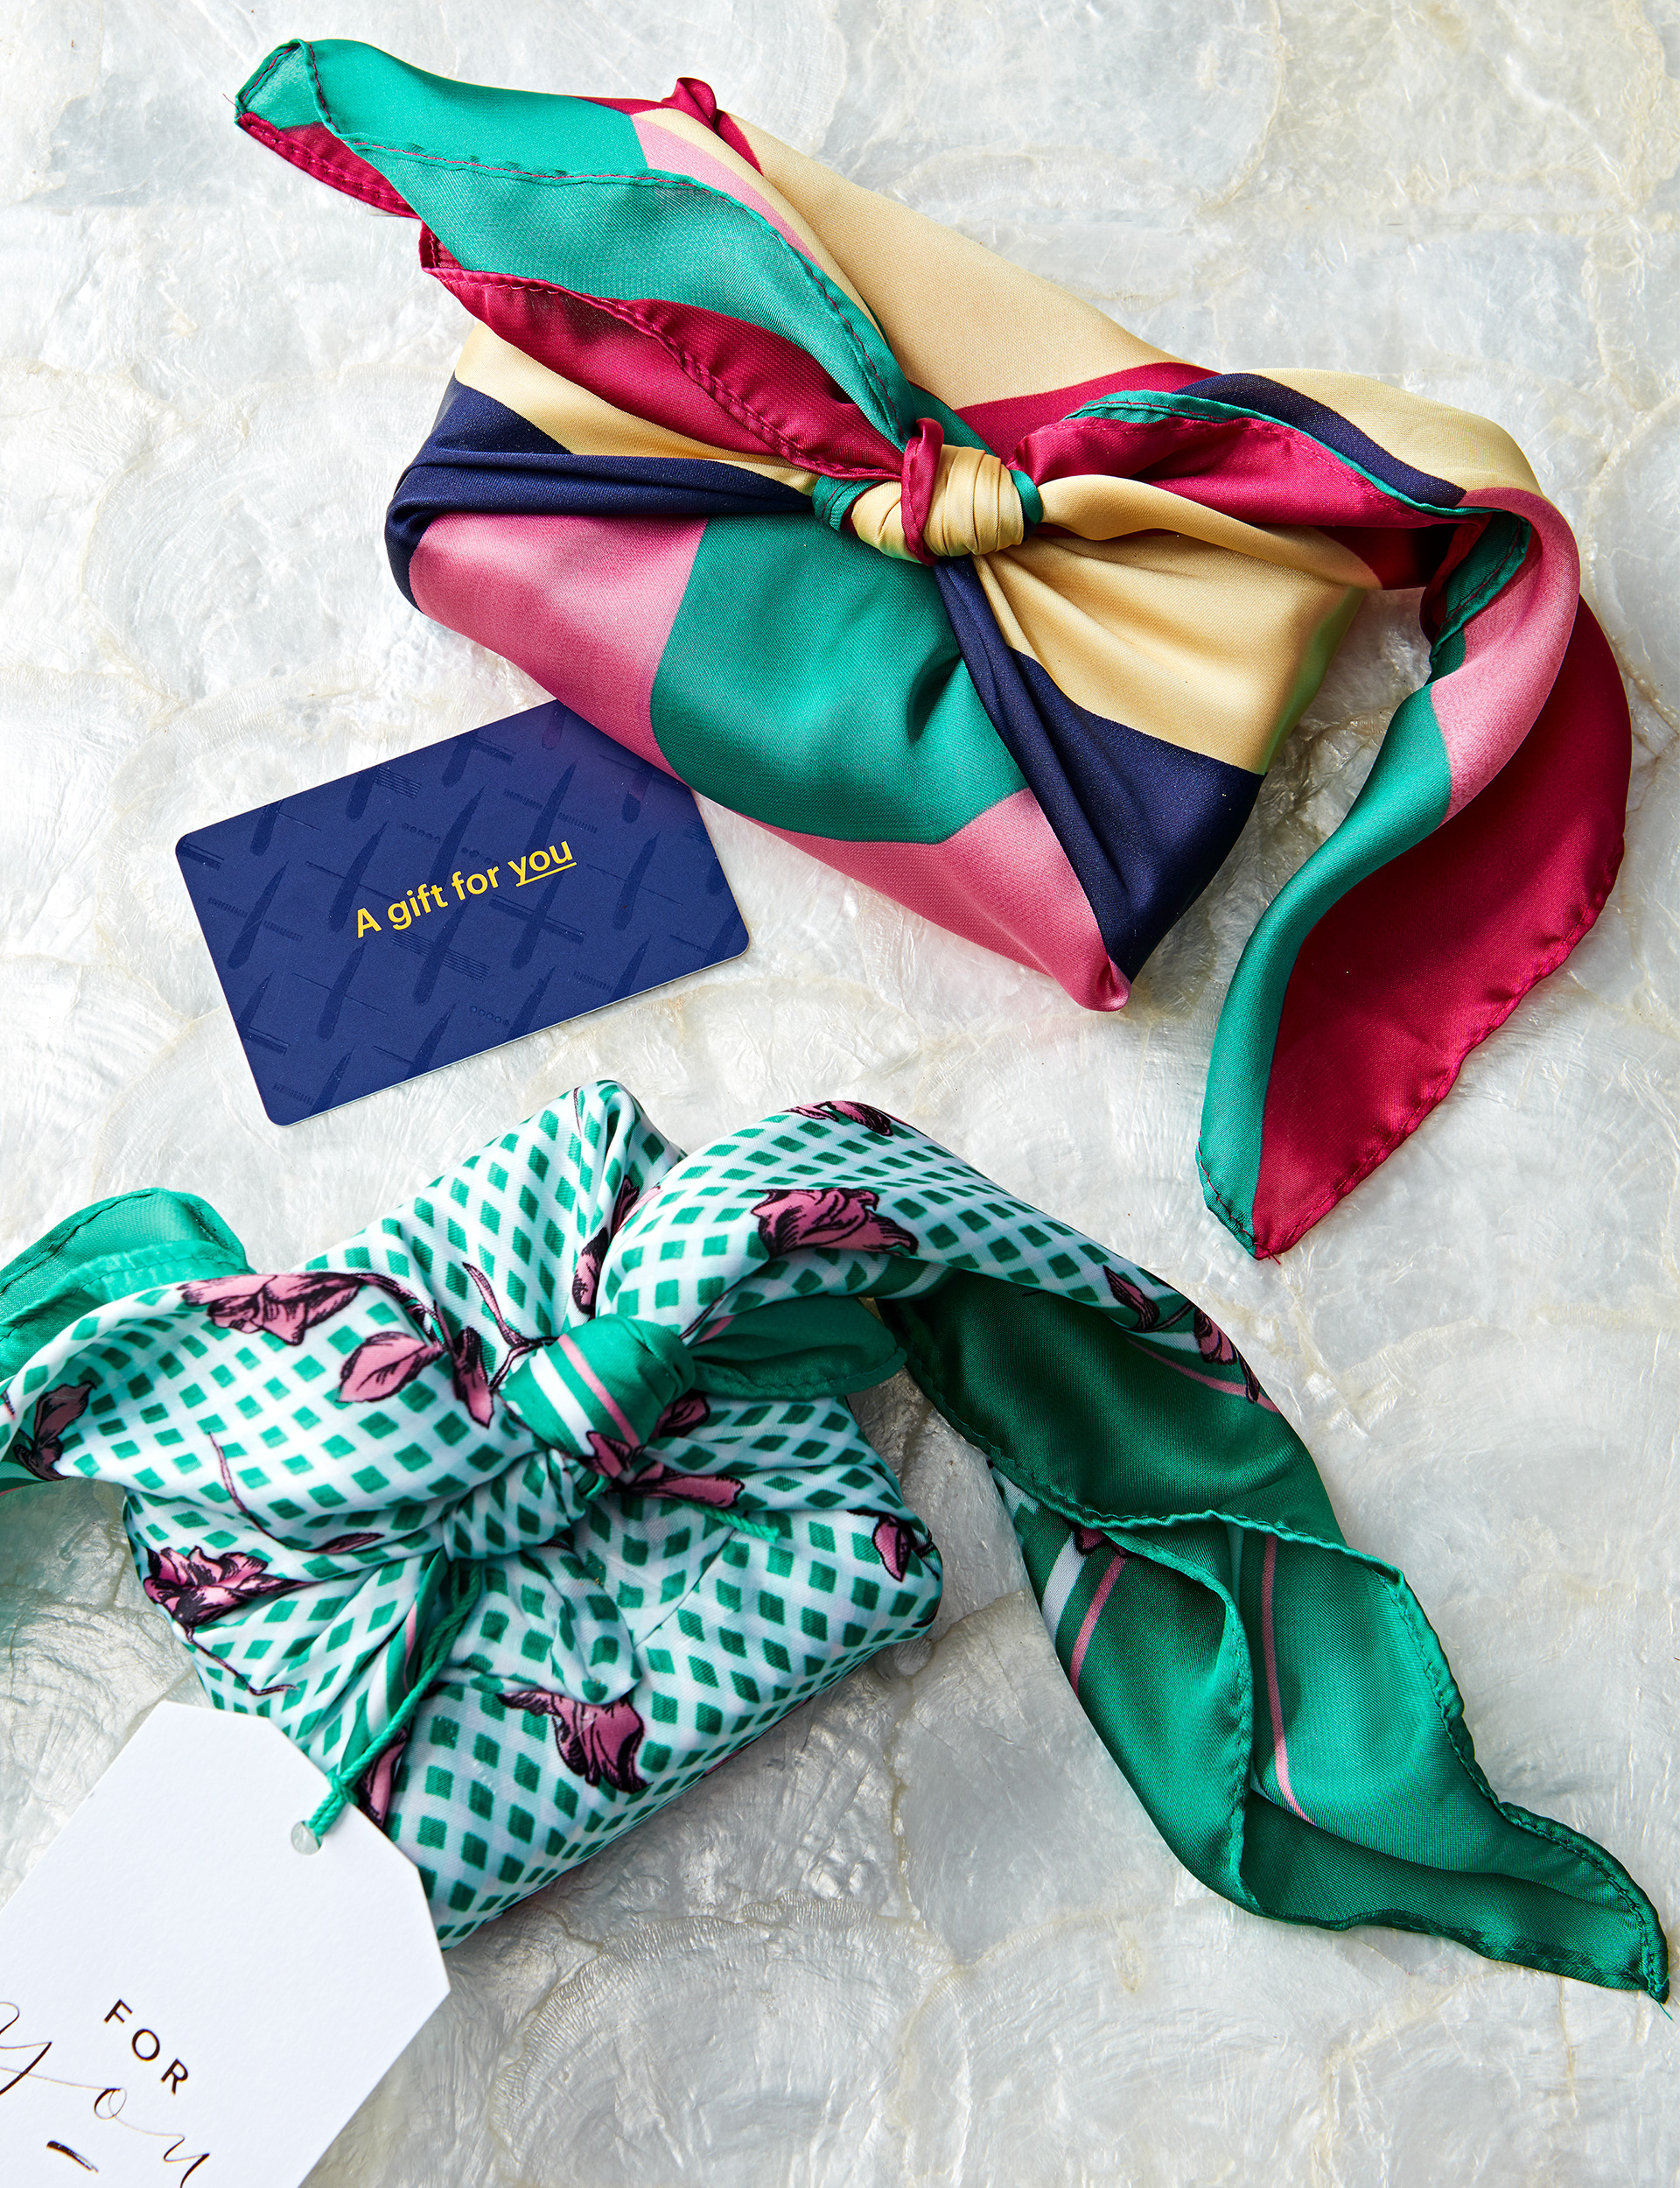 voucher gift wrapping ideas